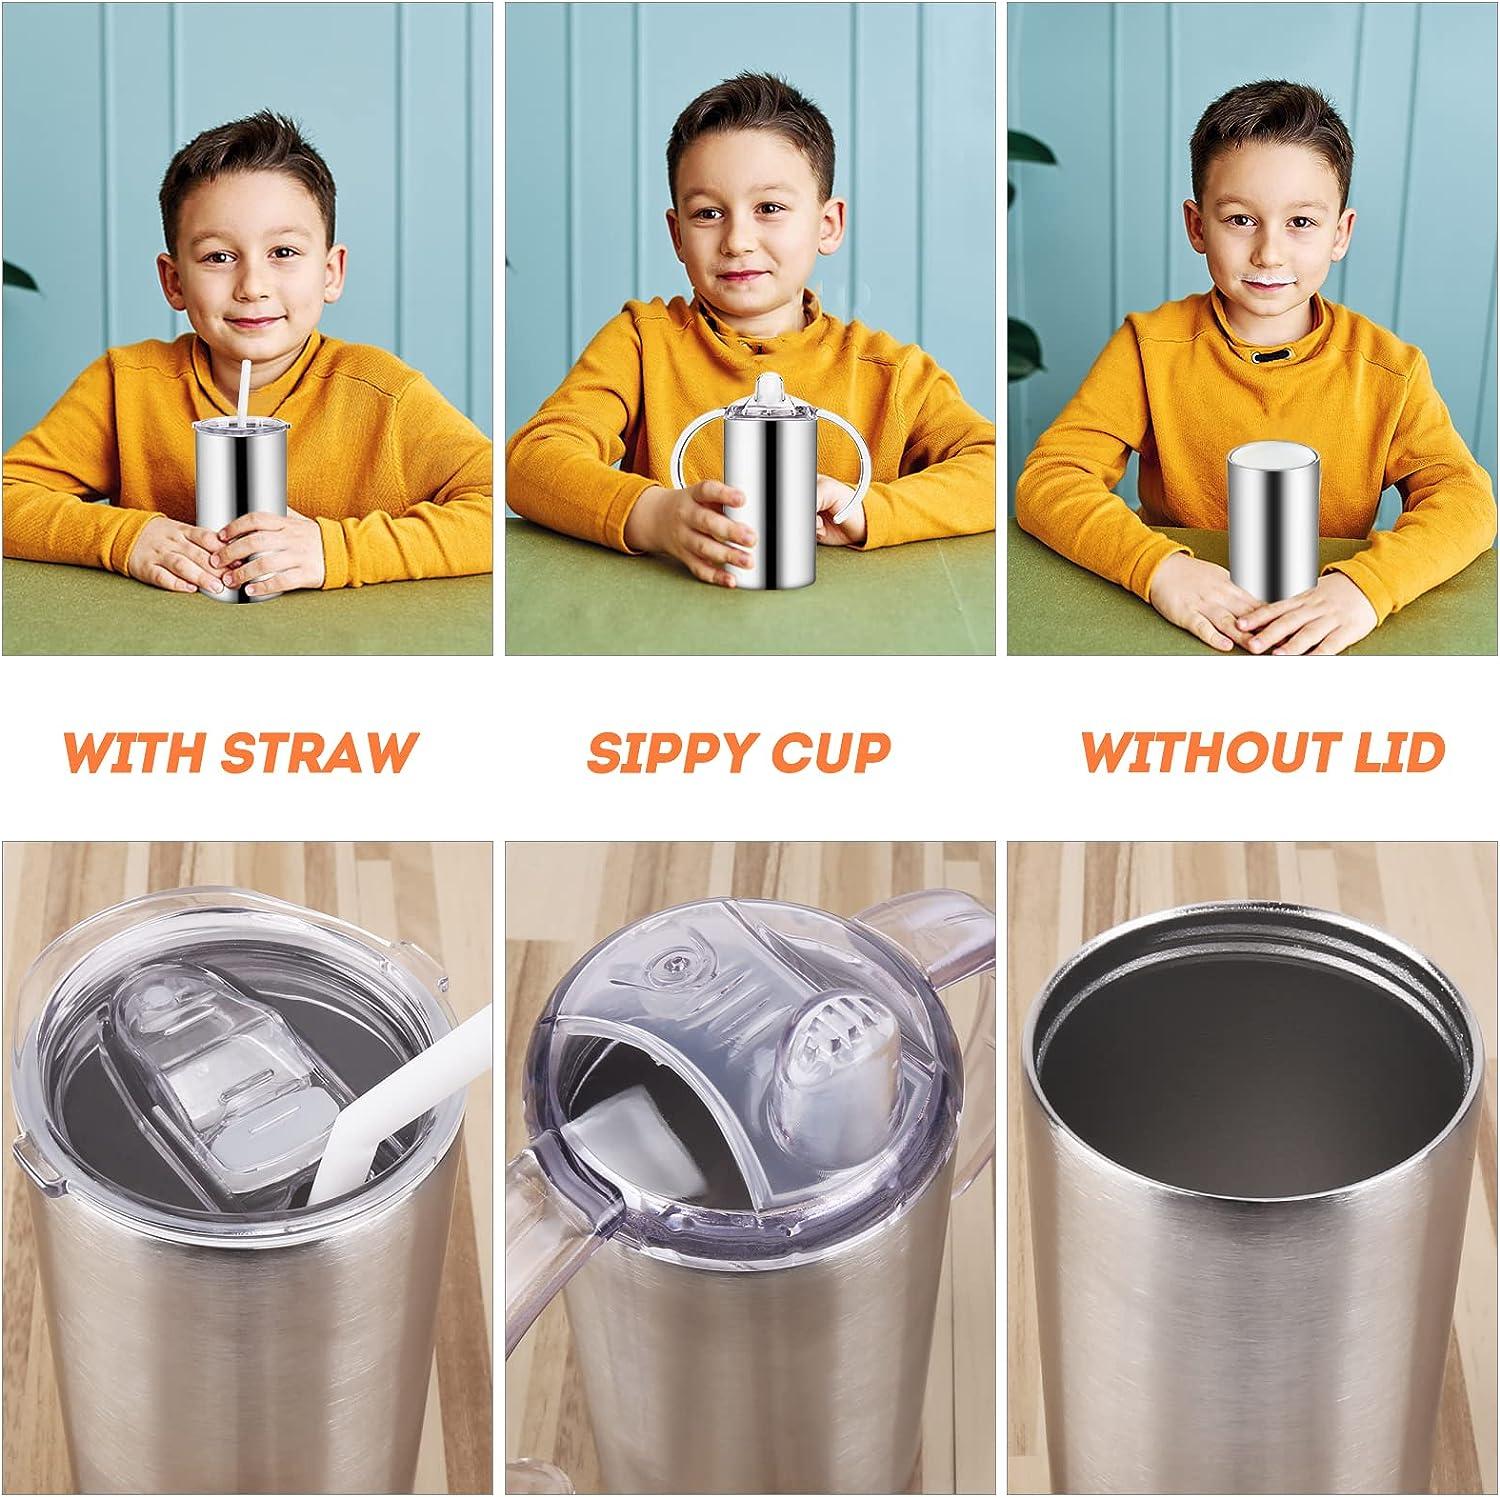 Vermida Stainless Steel Insulated Sippy Cups with Handles,12oz Spill Proof  Vacuum Tumbler for Toddle…See more Vermida Stainless Steel Insulated Sippy